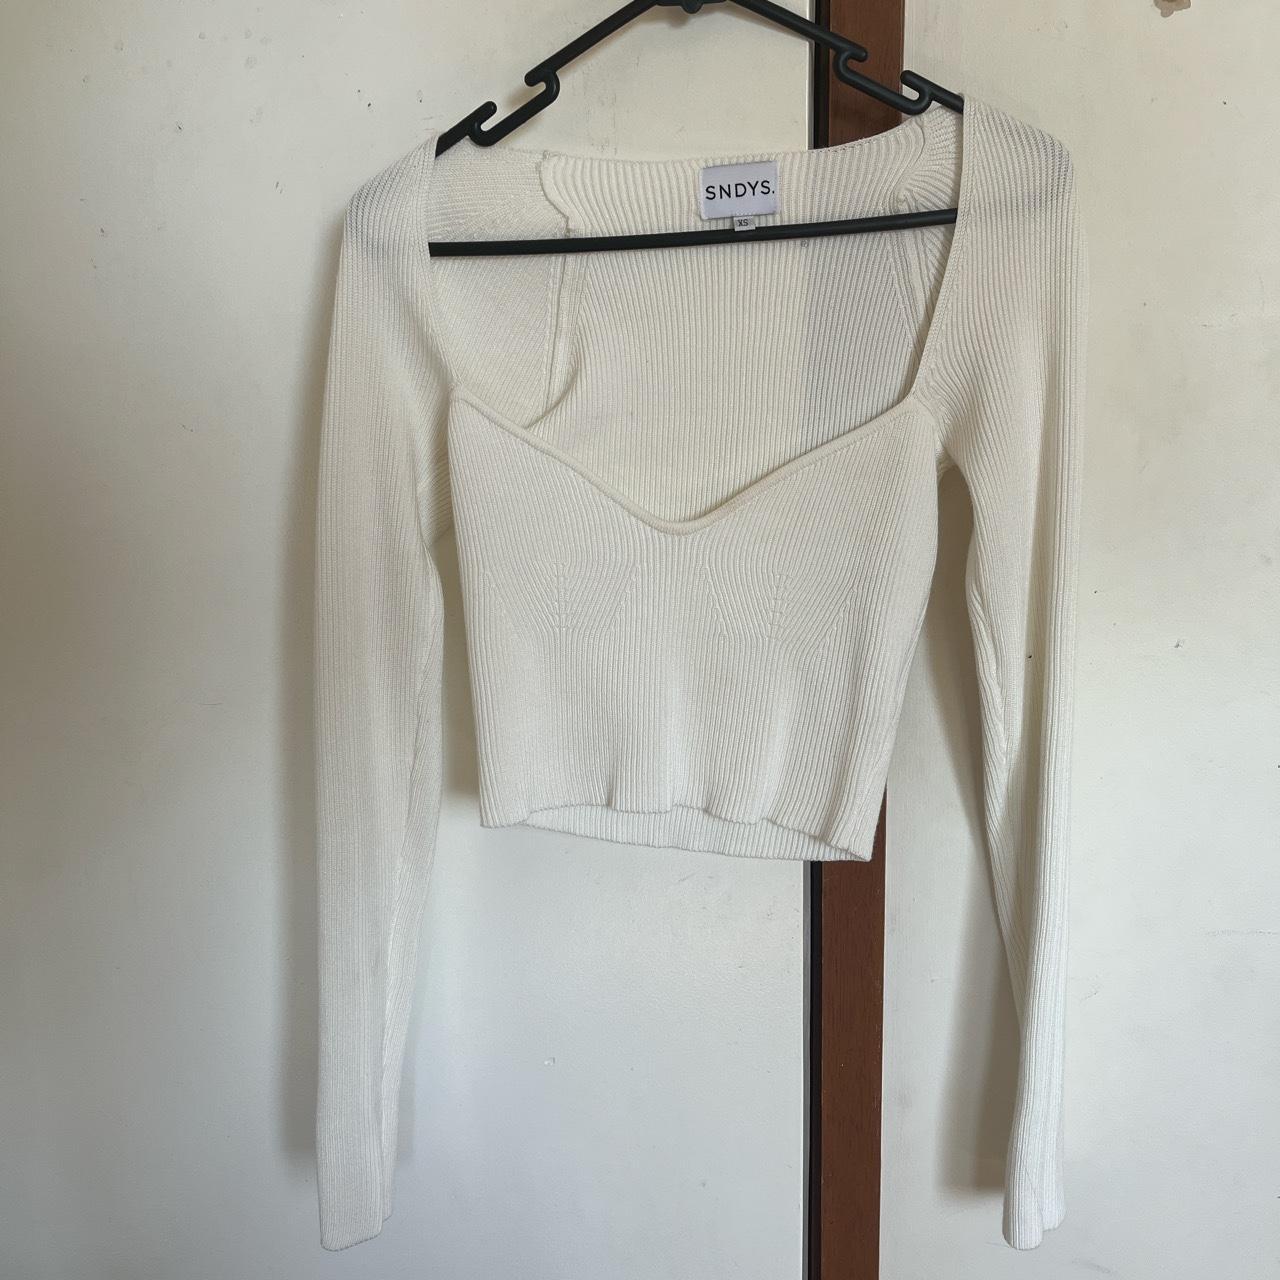 SNDYS THE LABEL AMOUR RIB TOP - WHITE Size -XS can... - Depop